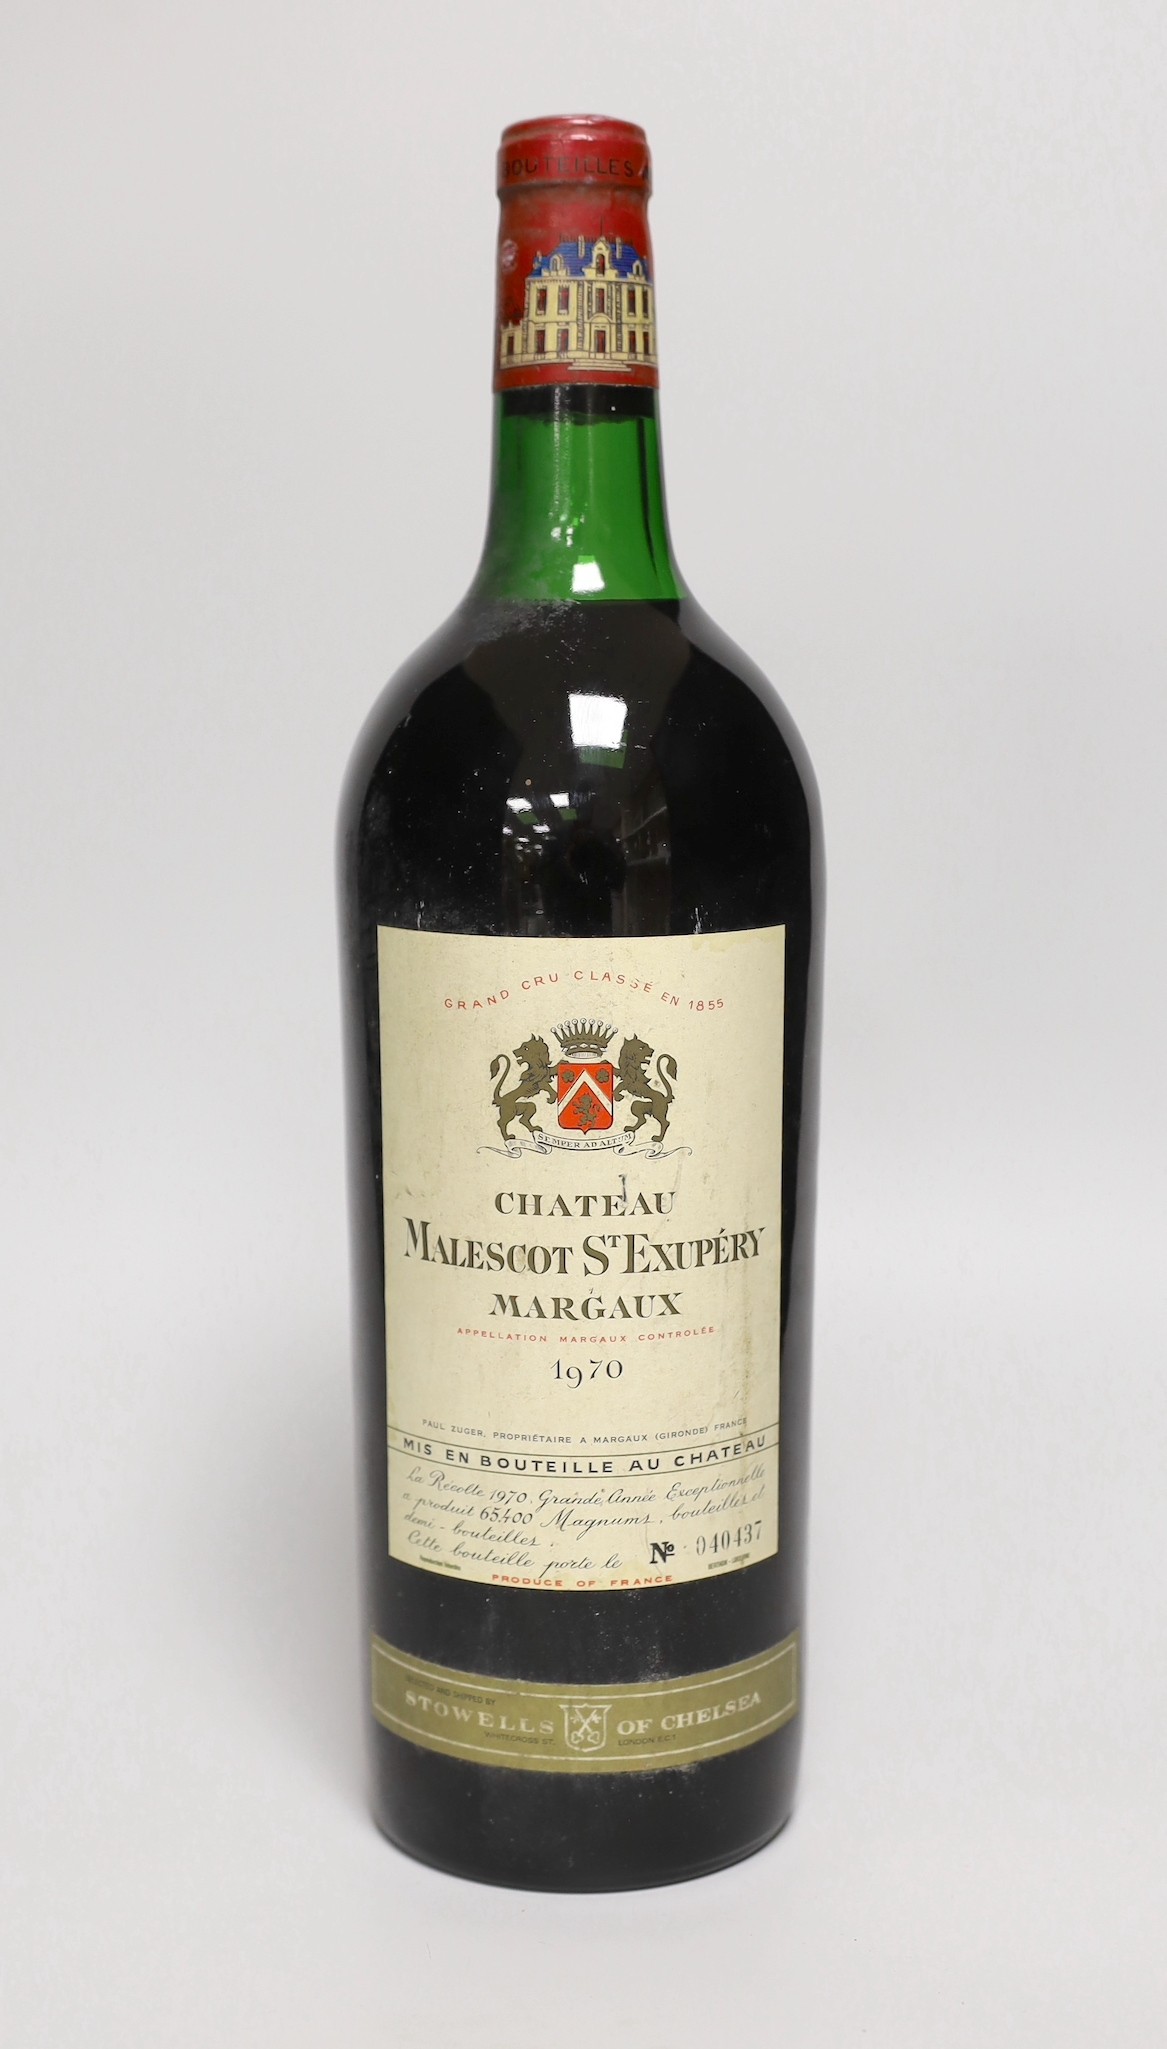 A magnum of Chateau Malescot St Exupery 1970